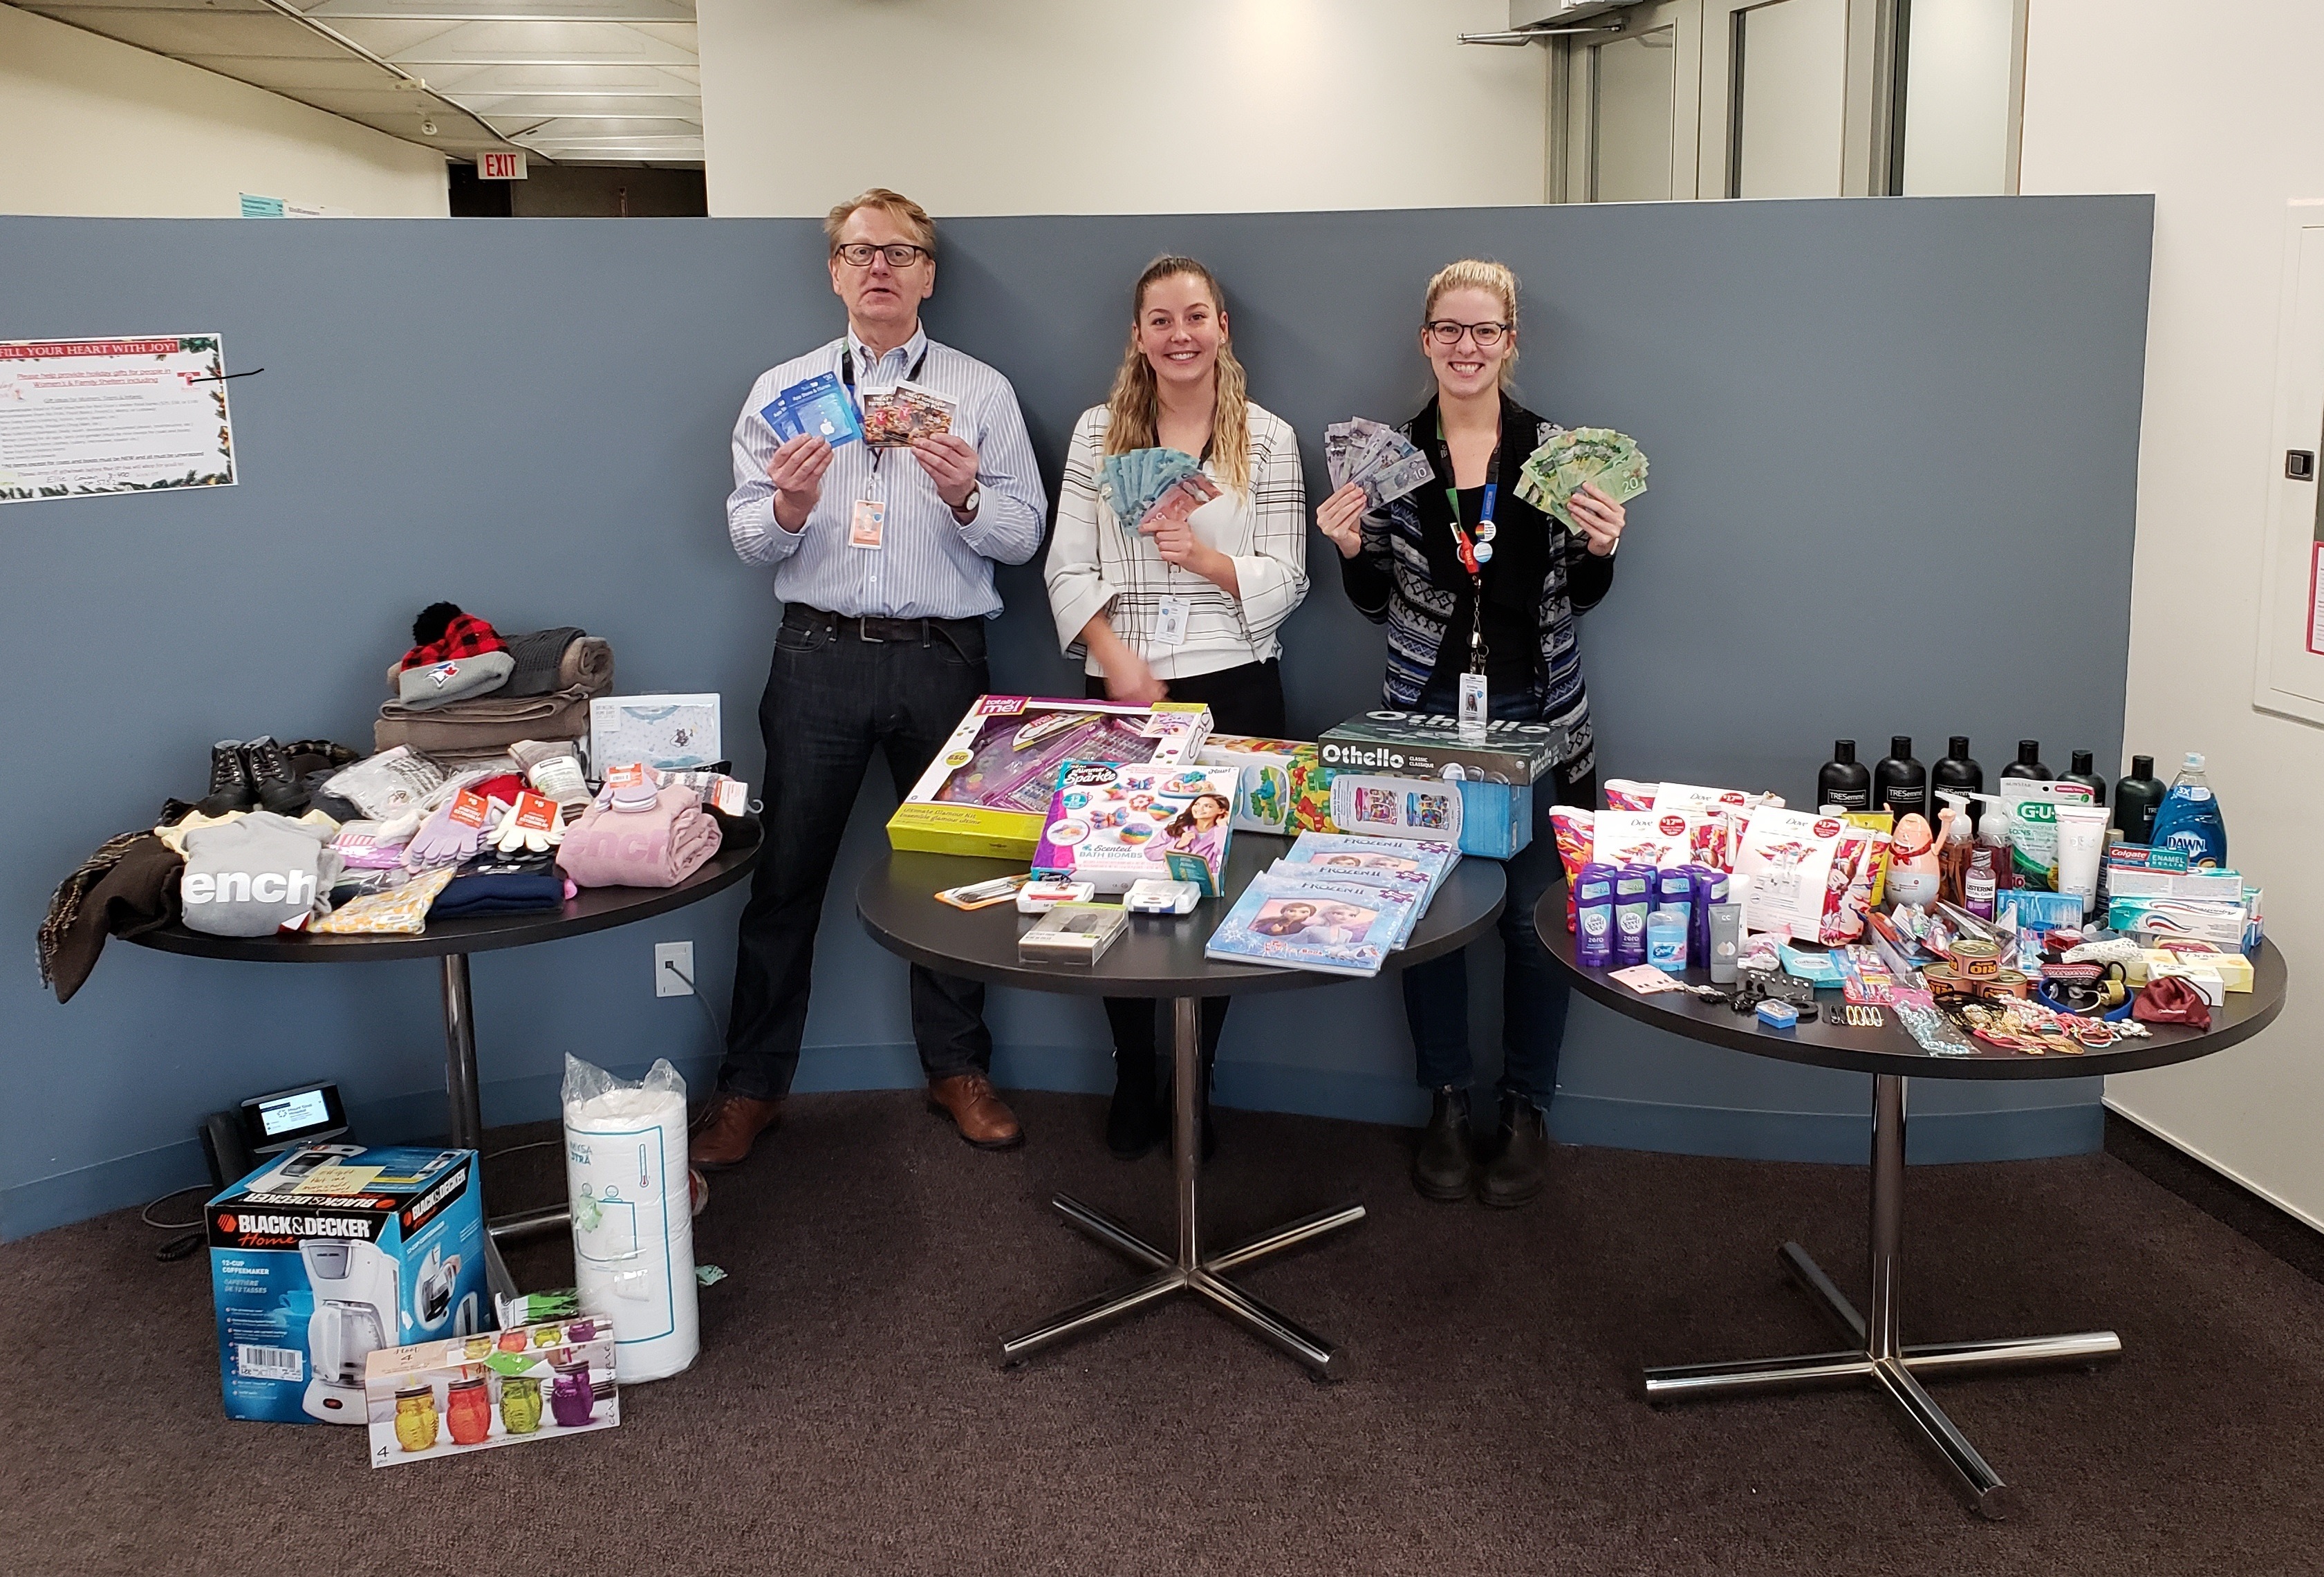 Three people in an office environment standing behind three round tables. The tables are filled with items, including scarves, hats, toys and personal care products donated to give to shelters during the holiday season. the people are also holding up gift cards and cash donations they have received.